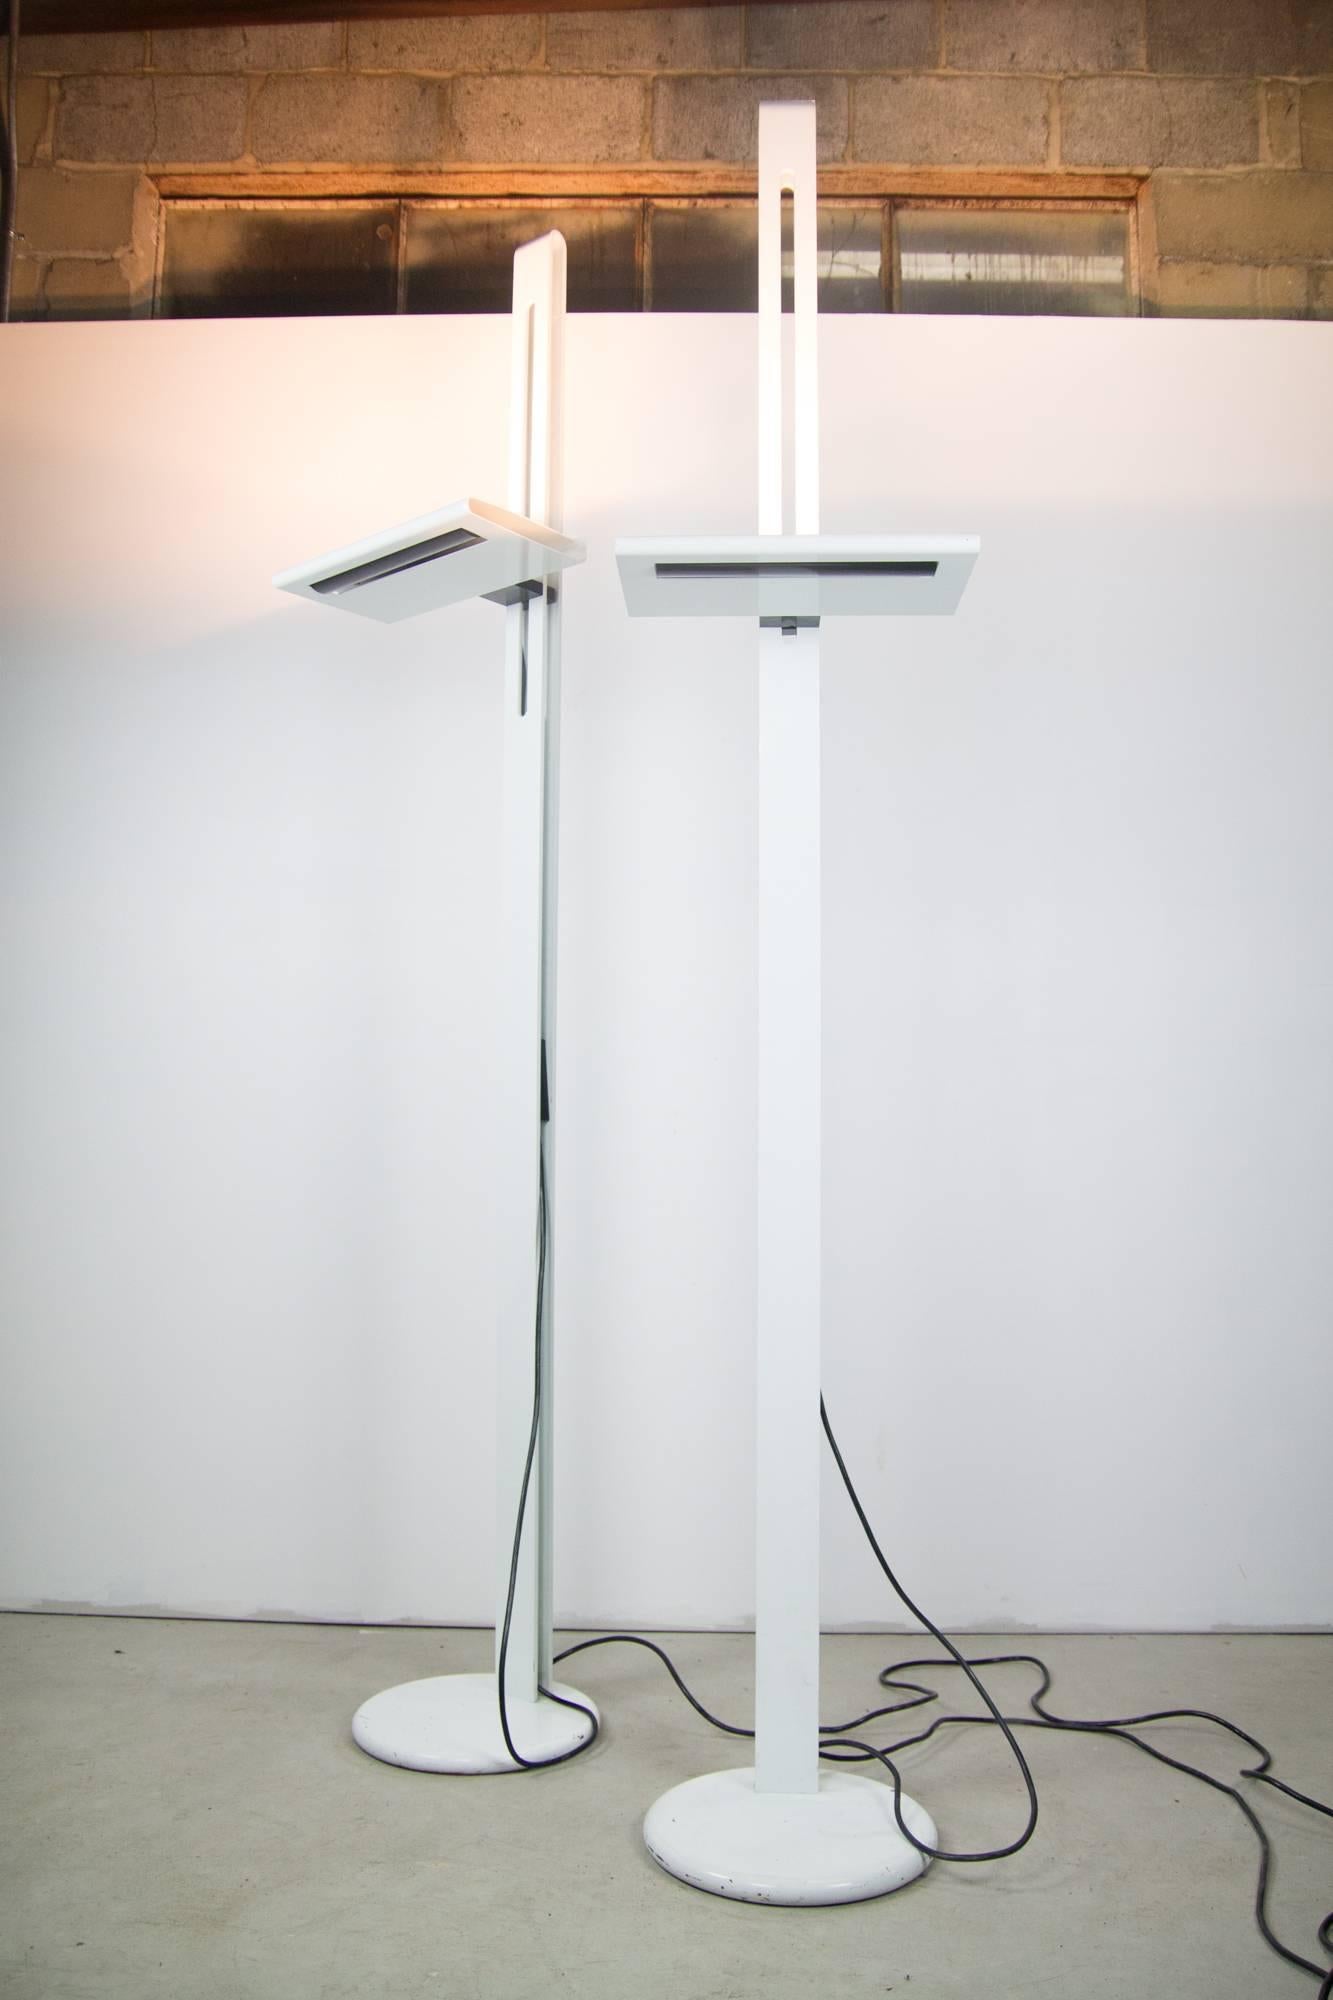 A pair of towering Postmodern Italian floor lamps in steel. The lamp heads adjust up and down the top third of the rail and articulate left and right. The halogen light is dimmable via switches which can be concealed within the lamp body. Shade